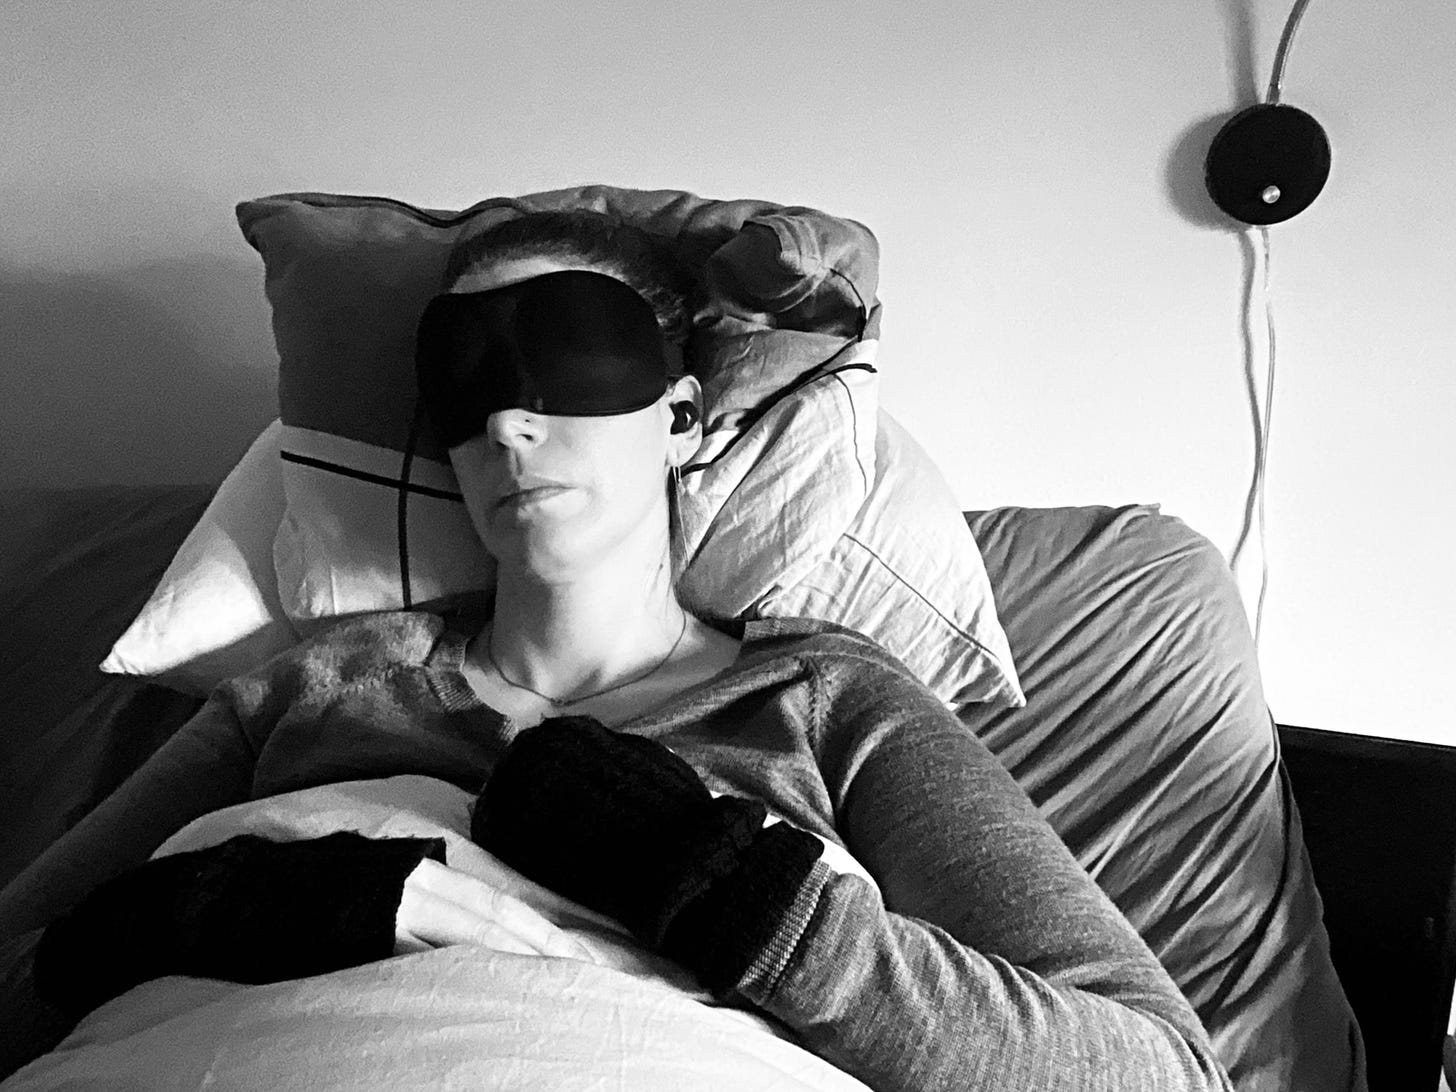 A woman living with severe ME/CFS is resting and wears a sleeping mask to protect her from light as she is light sensitive